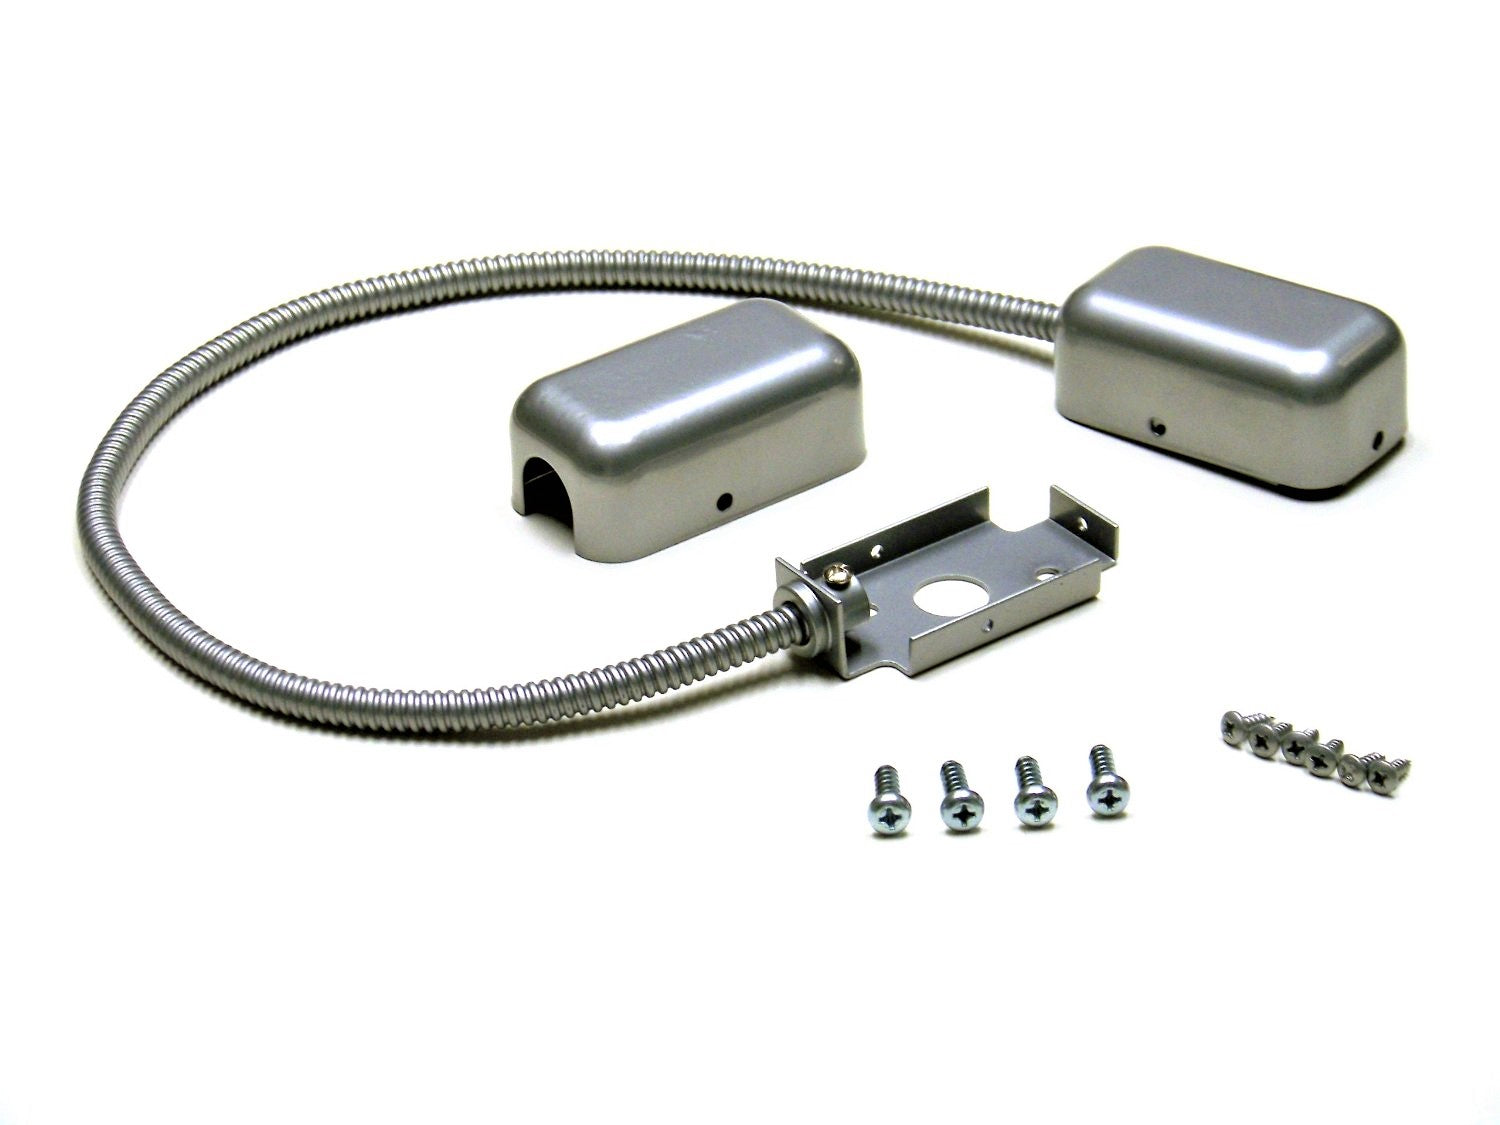 Armored flexible metal conduit for access control systems